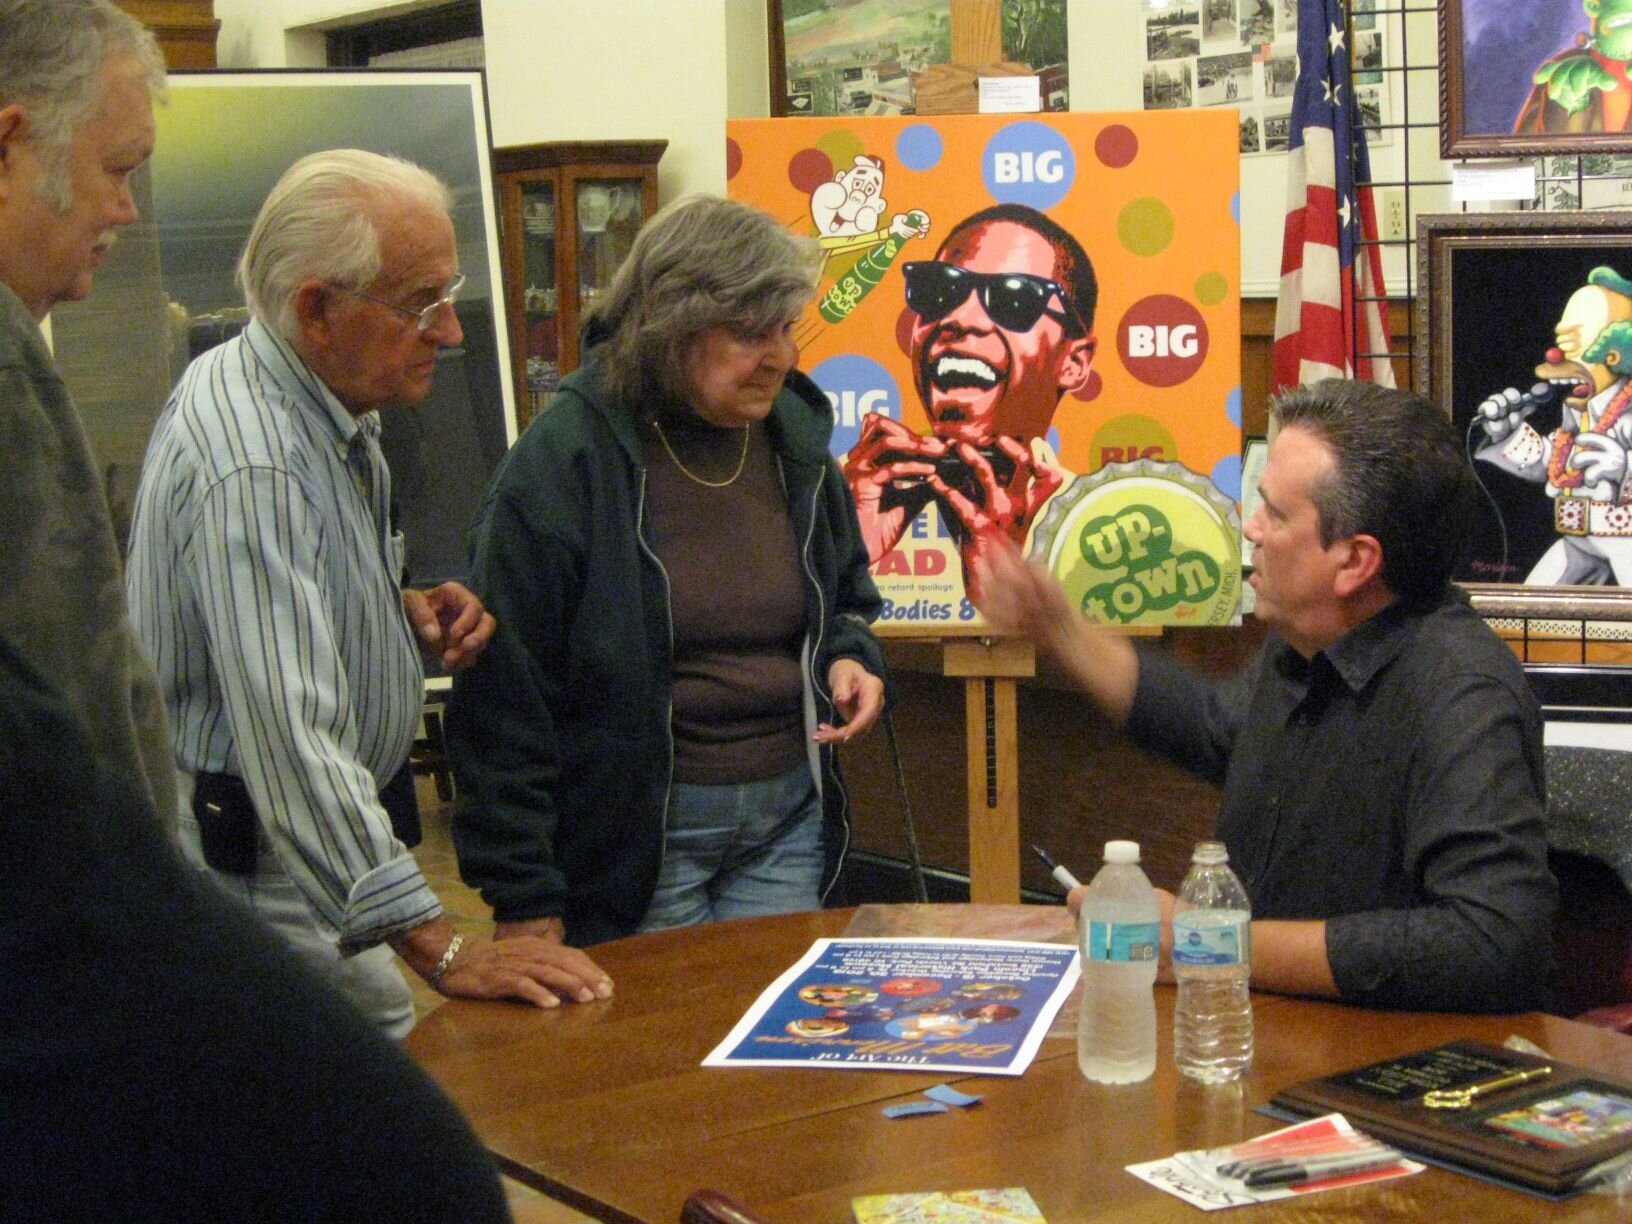 Bill Morrison, seated at right, greets guests at the opening reception for “The Art of Bill Morrison”